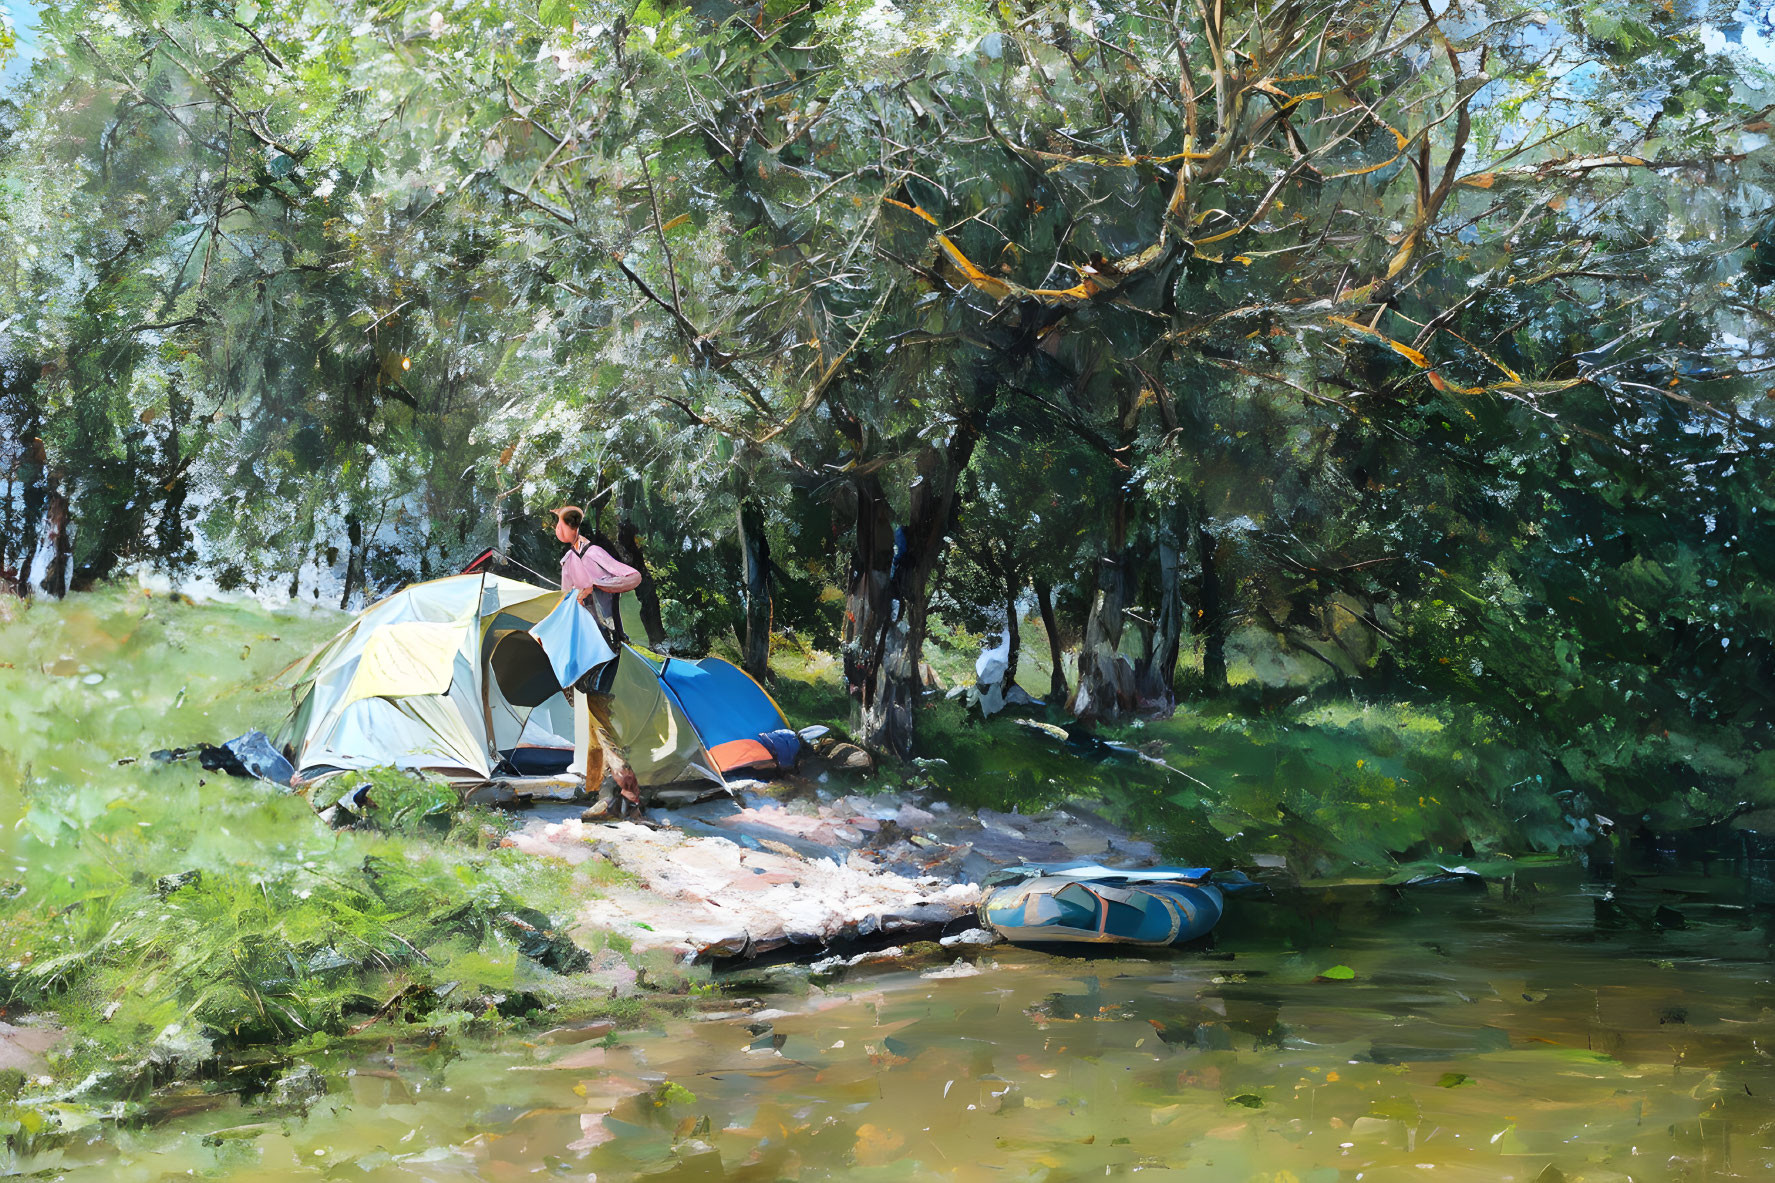 Tranquil riverside scene with two tents, lush greenery, person, and kayak